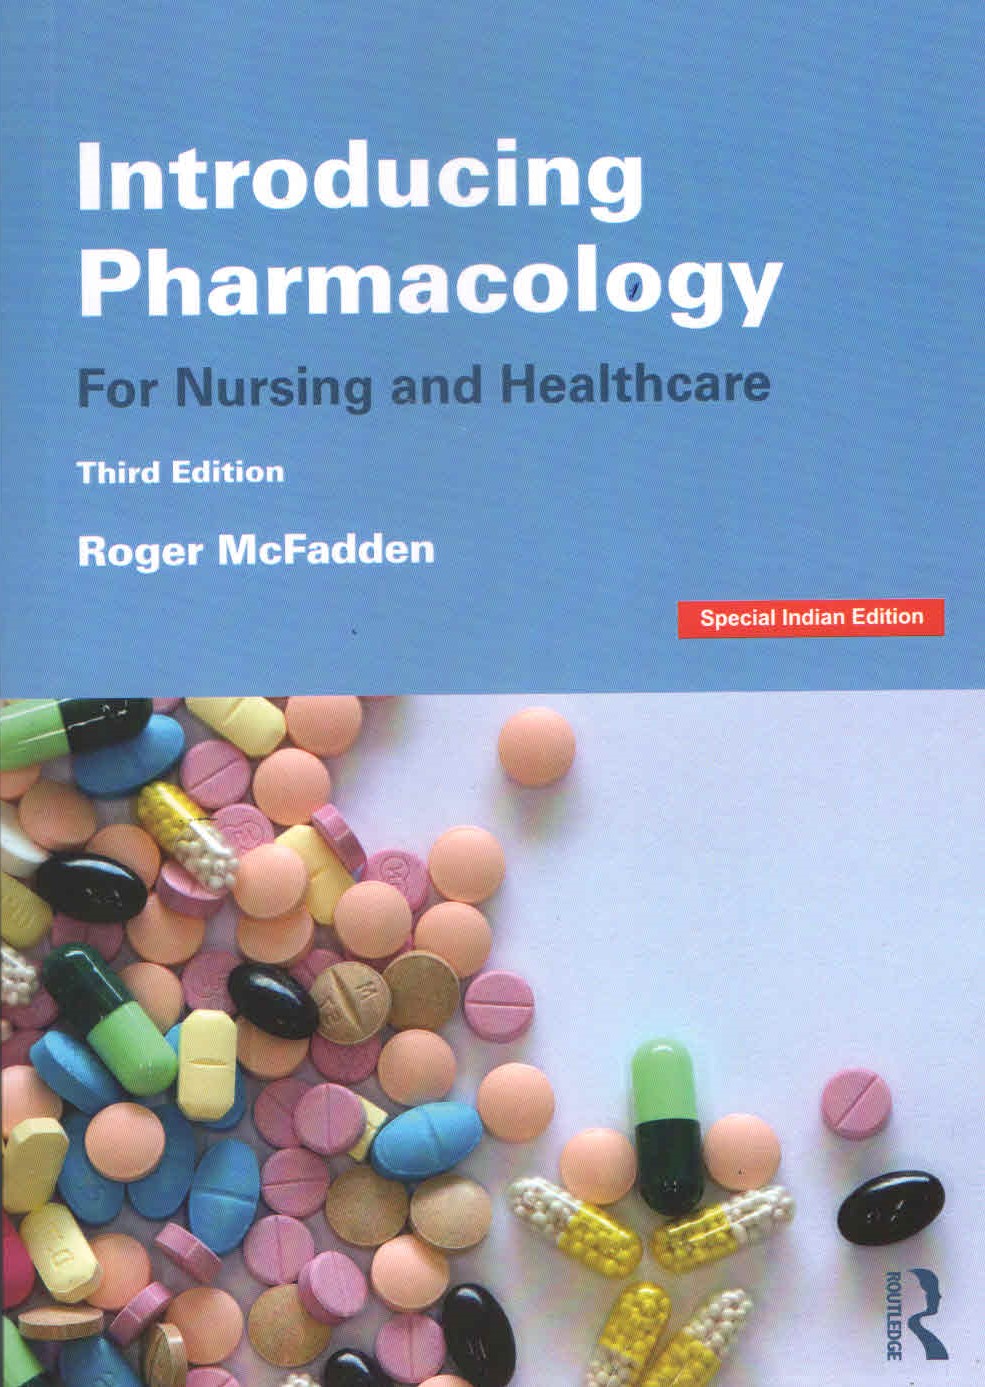 
basic-sciences/pharmacology/introducing-pharmacology-for-nursing-and-healthcare9781032452463